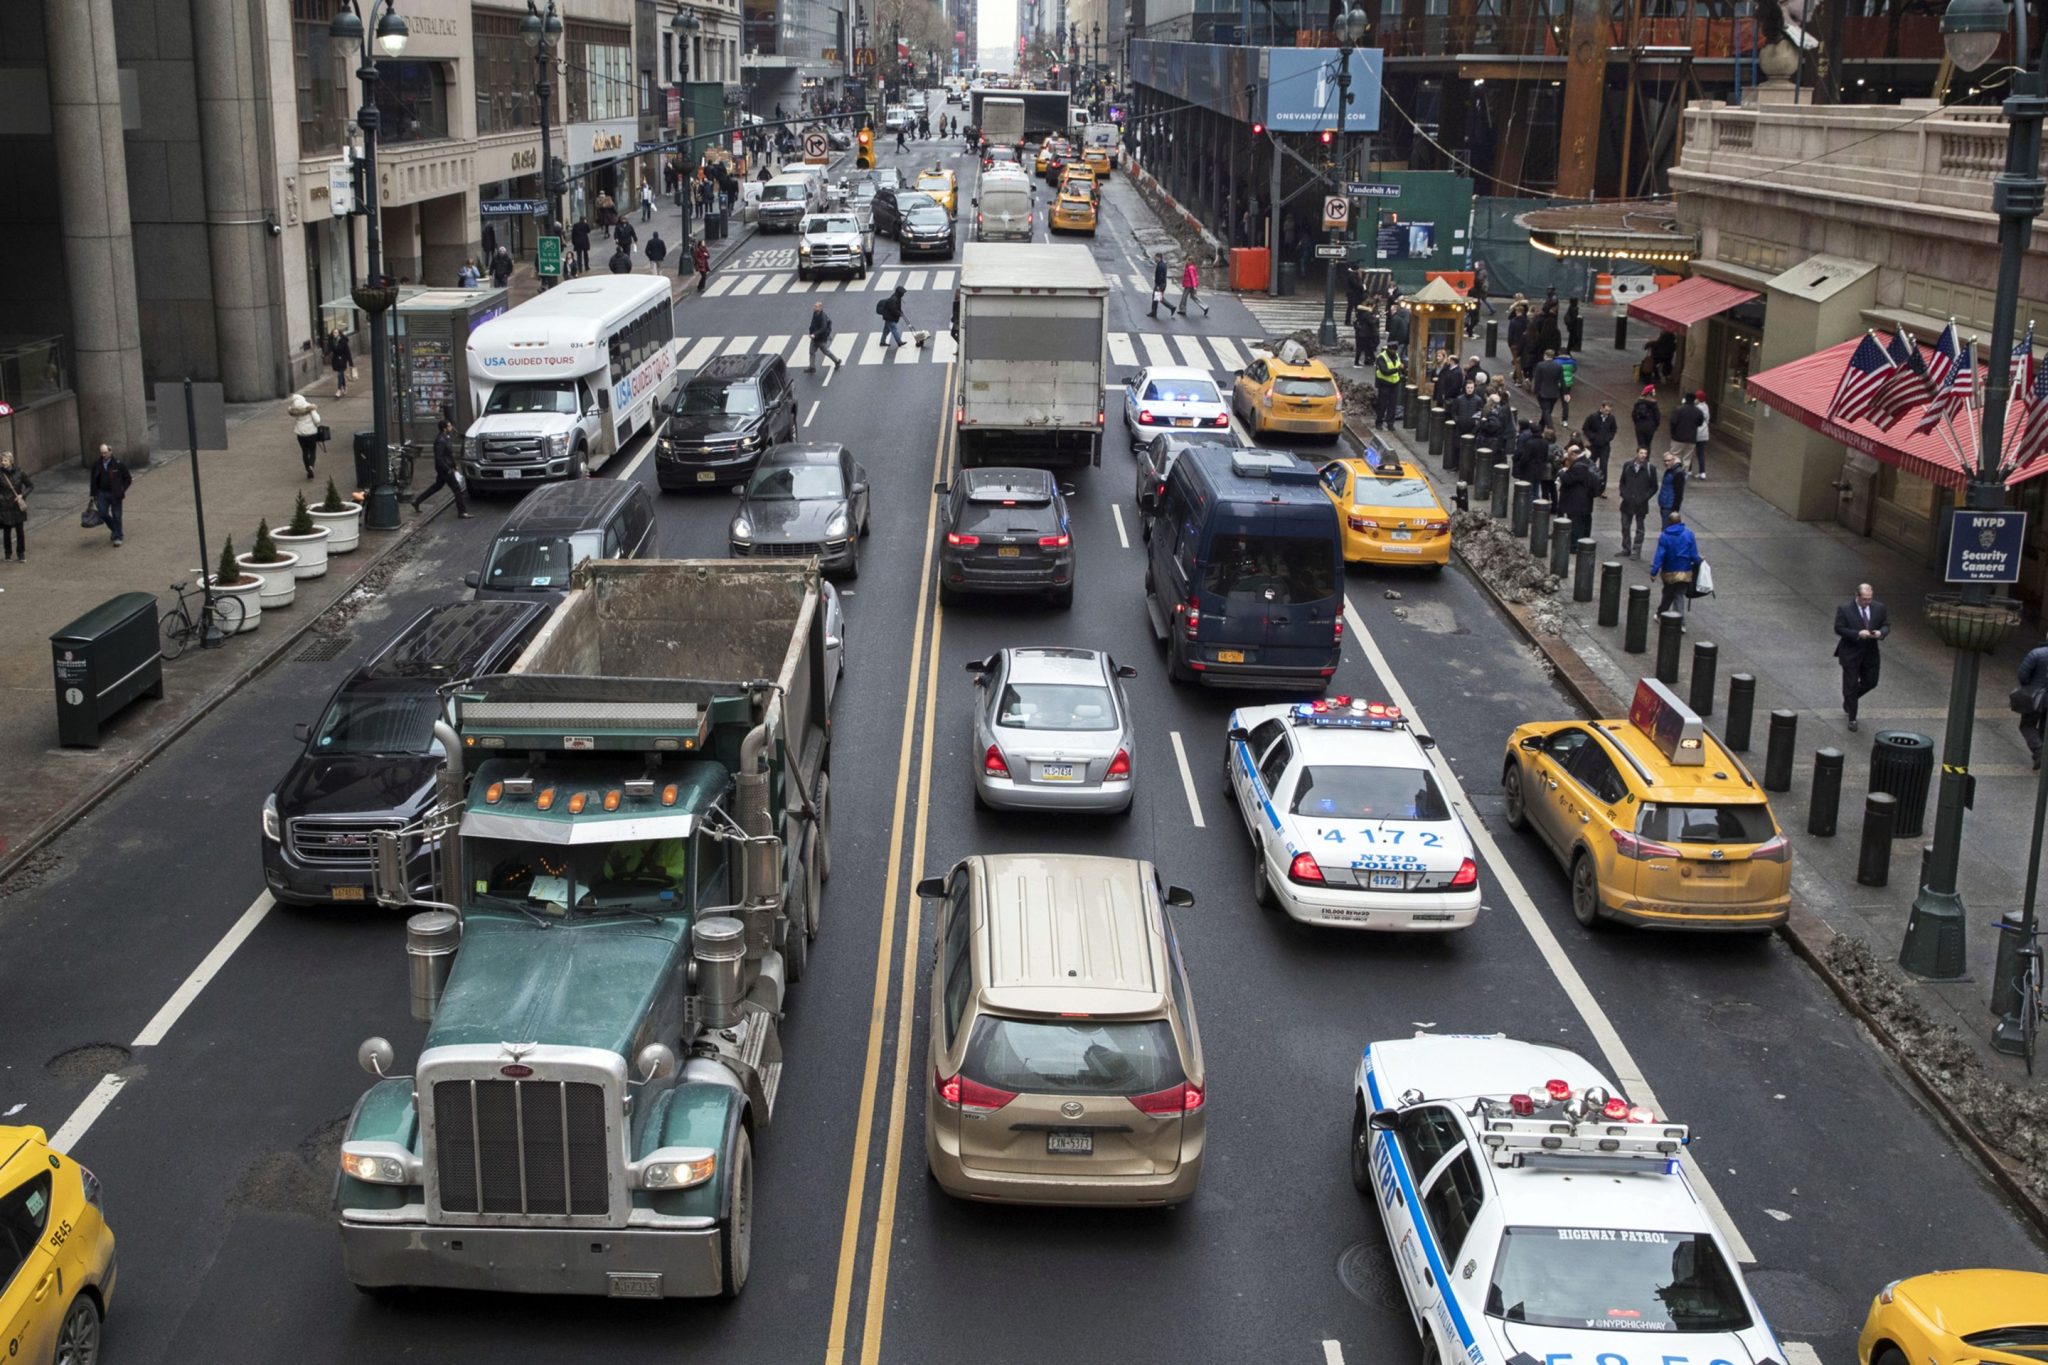 New York City unveils America’s first congestion pricing plan, charging most drivers $15 to enter Manhattan